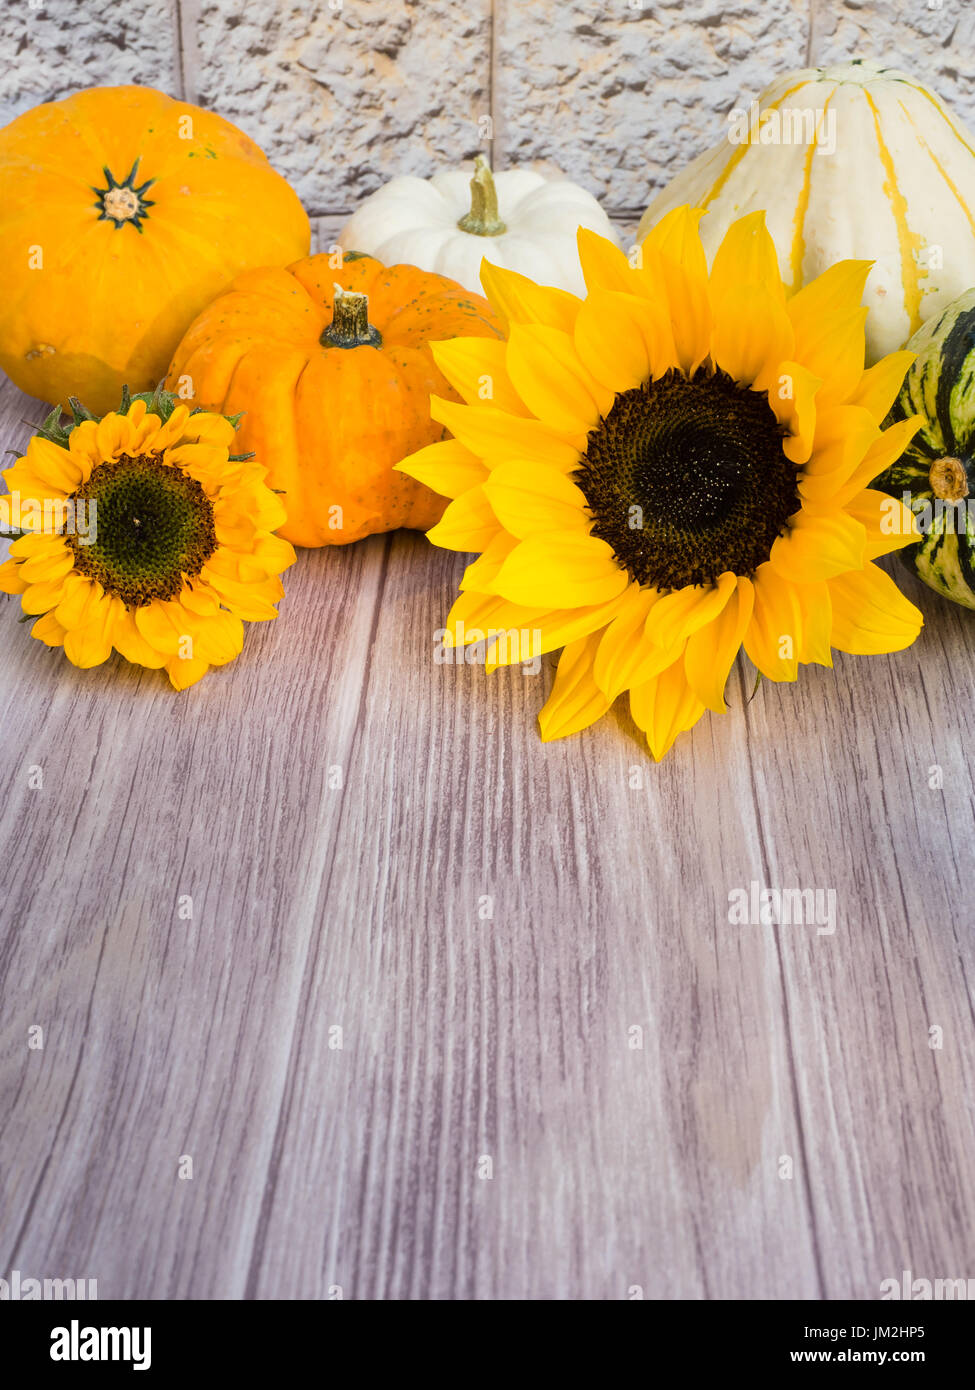 Autumnal background of wood with pumpkins and blooms at the top Stock Photo